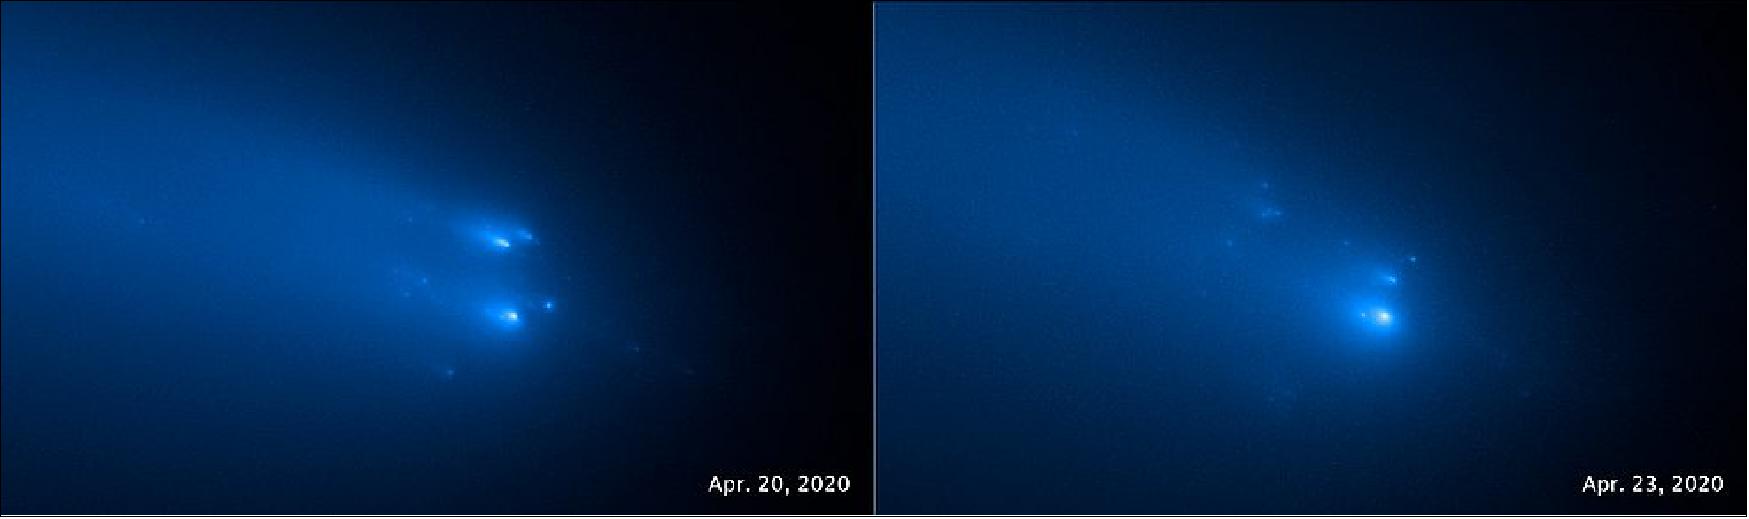 Figure 68: These two Hubble Space Telescope images of comet C/2019 Y4 (ATLAS), taken on April 20 (left) and April 23, 2020, provide the sharpest views yet of the breakup of the solid nucleus of the comet. Hubble's eagle-eye view identifies as many as 30 separate fragments. Hubble distinguishes pieces that are roughly the size of a house. Before the breakup, the entire nucleus of the comet may have been the length of one or two football fields. Astronomers aren't sure why this comet broke apart. The comet was approximately 91 million miles (146 million kilometers) from Earth when the images were taken [image credit: NASA, ESA, STScI and D. Jewitt (UCLA)]